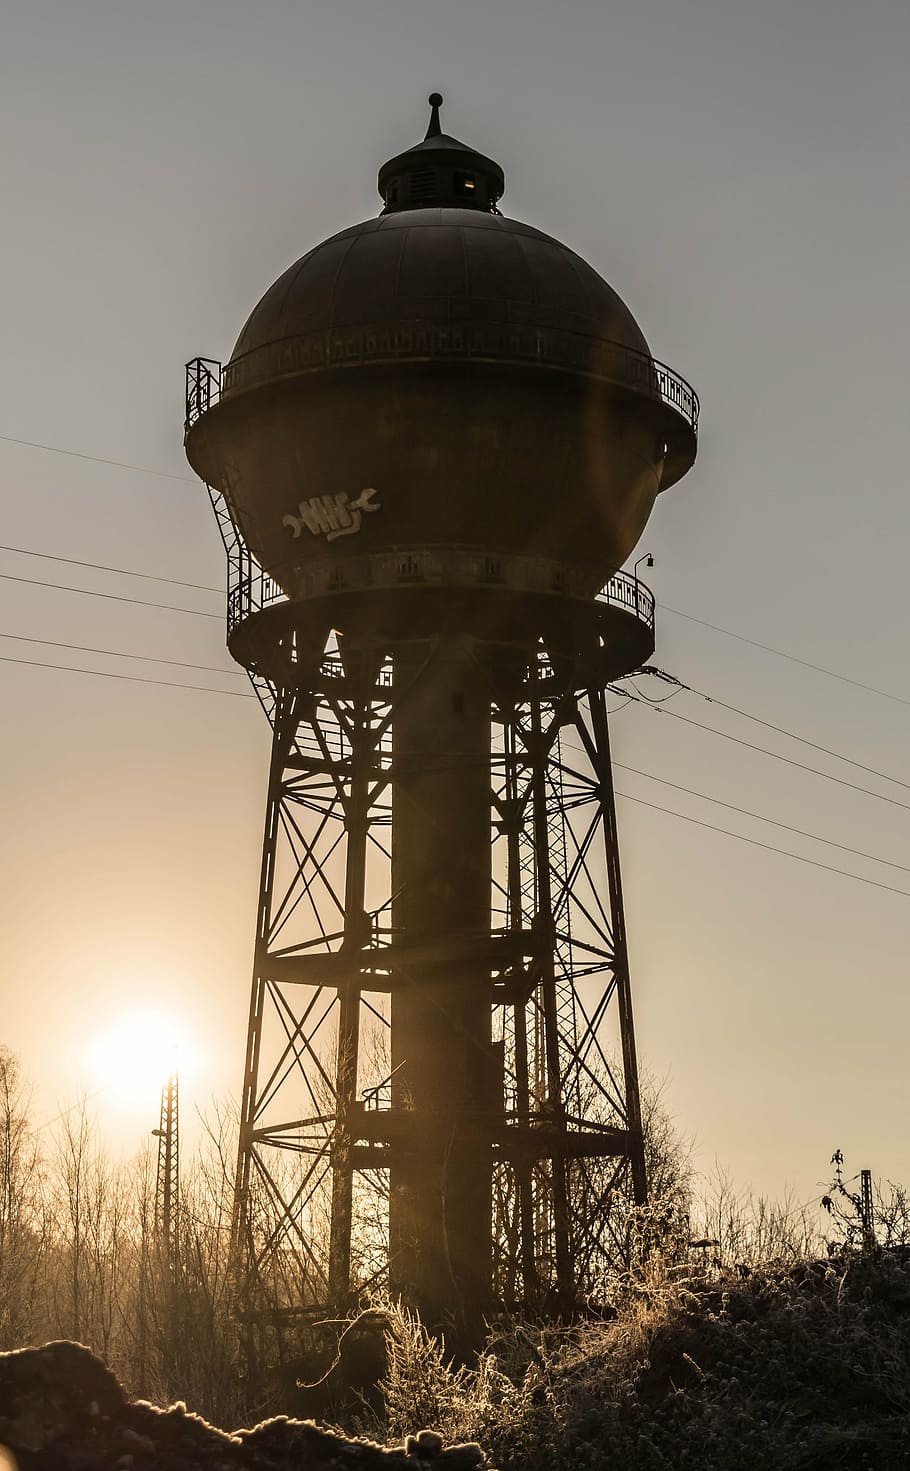 photography, brown, metal tank, post, daytime, tower, water tower, memory, back light, architecture